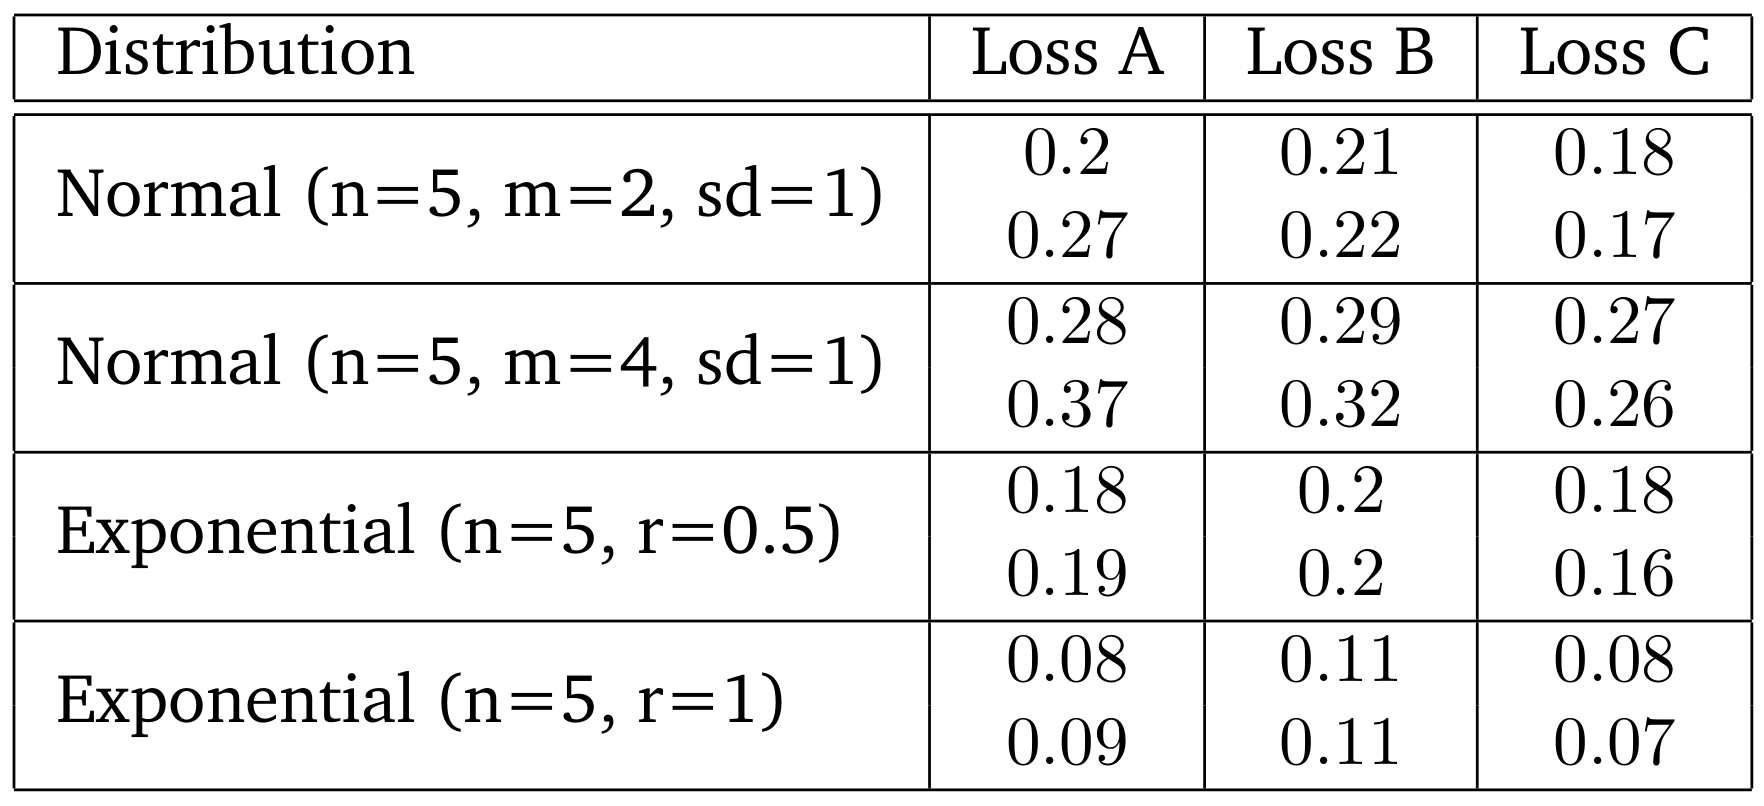 Table 2: Percentages of bifurcations and root-bifurcations given the parametricized simulations